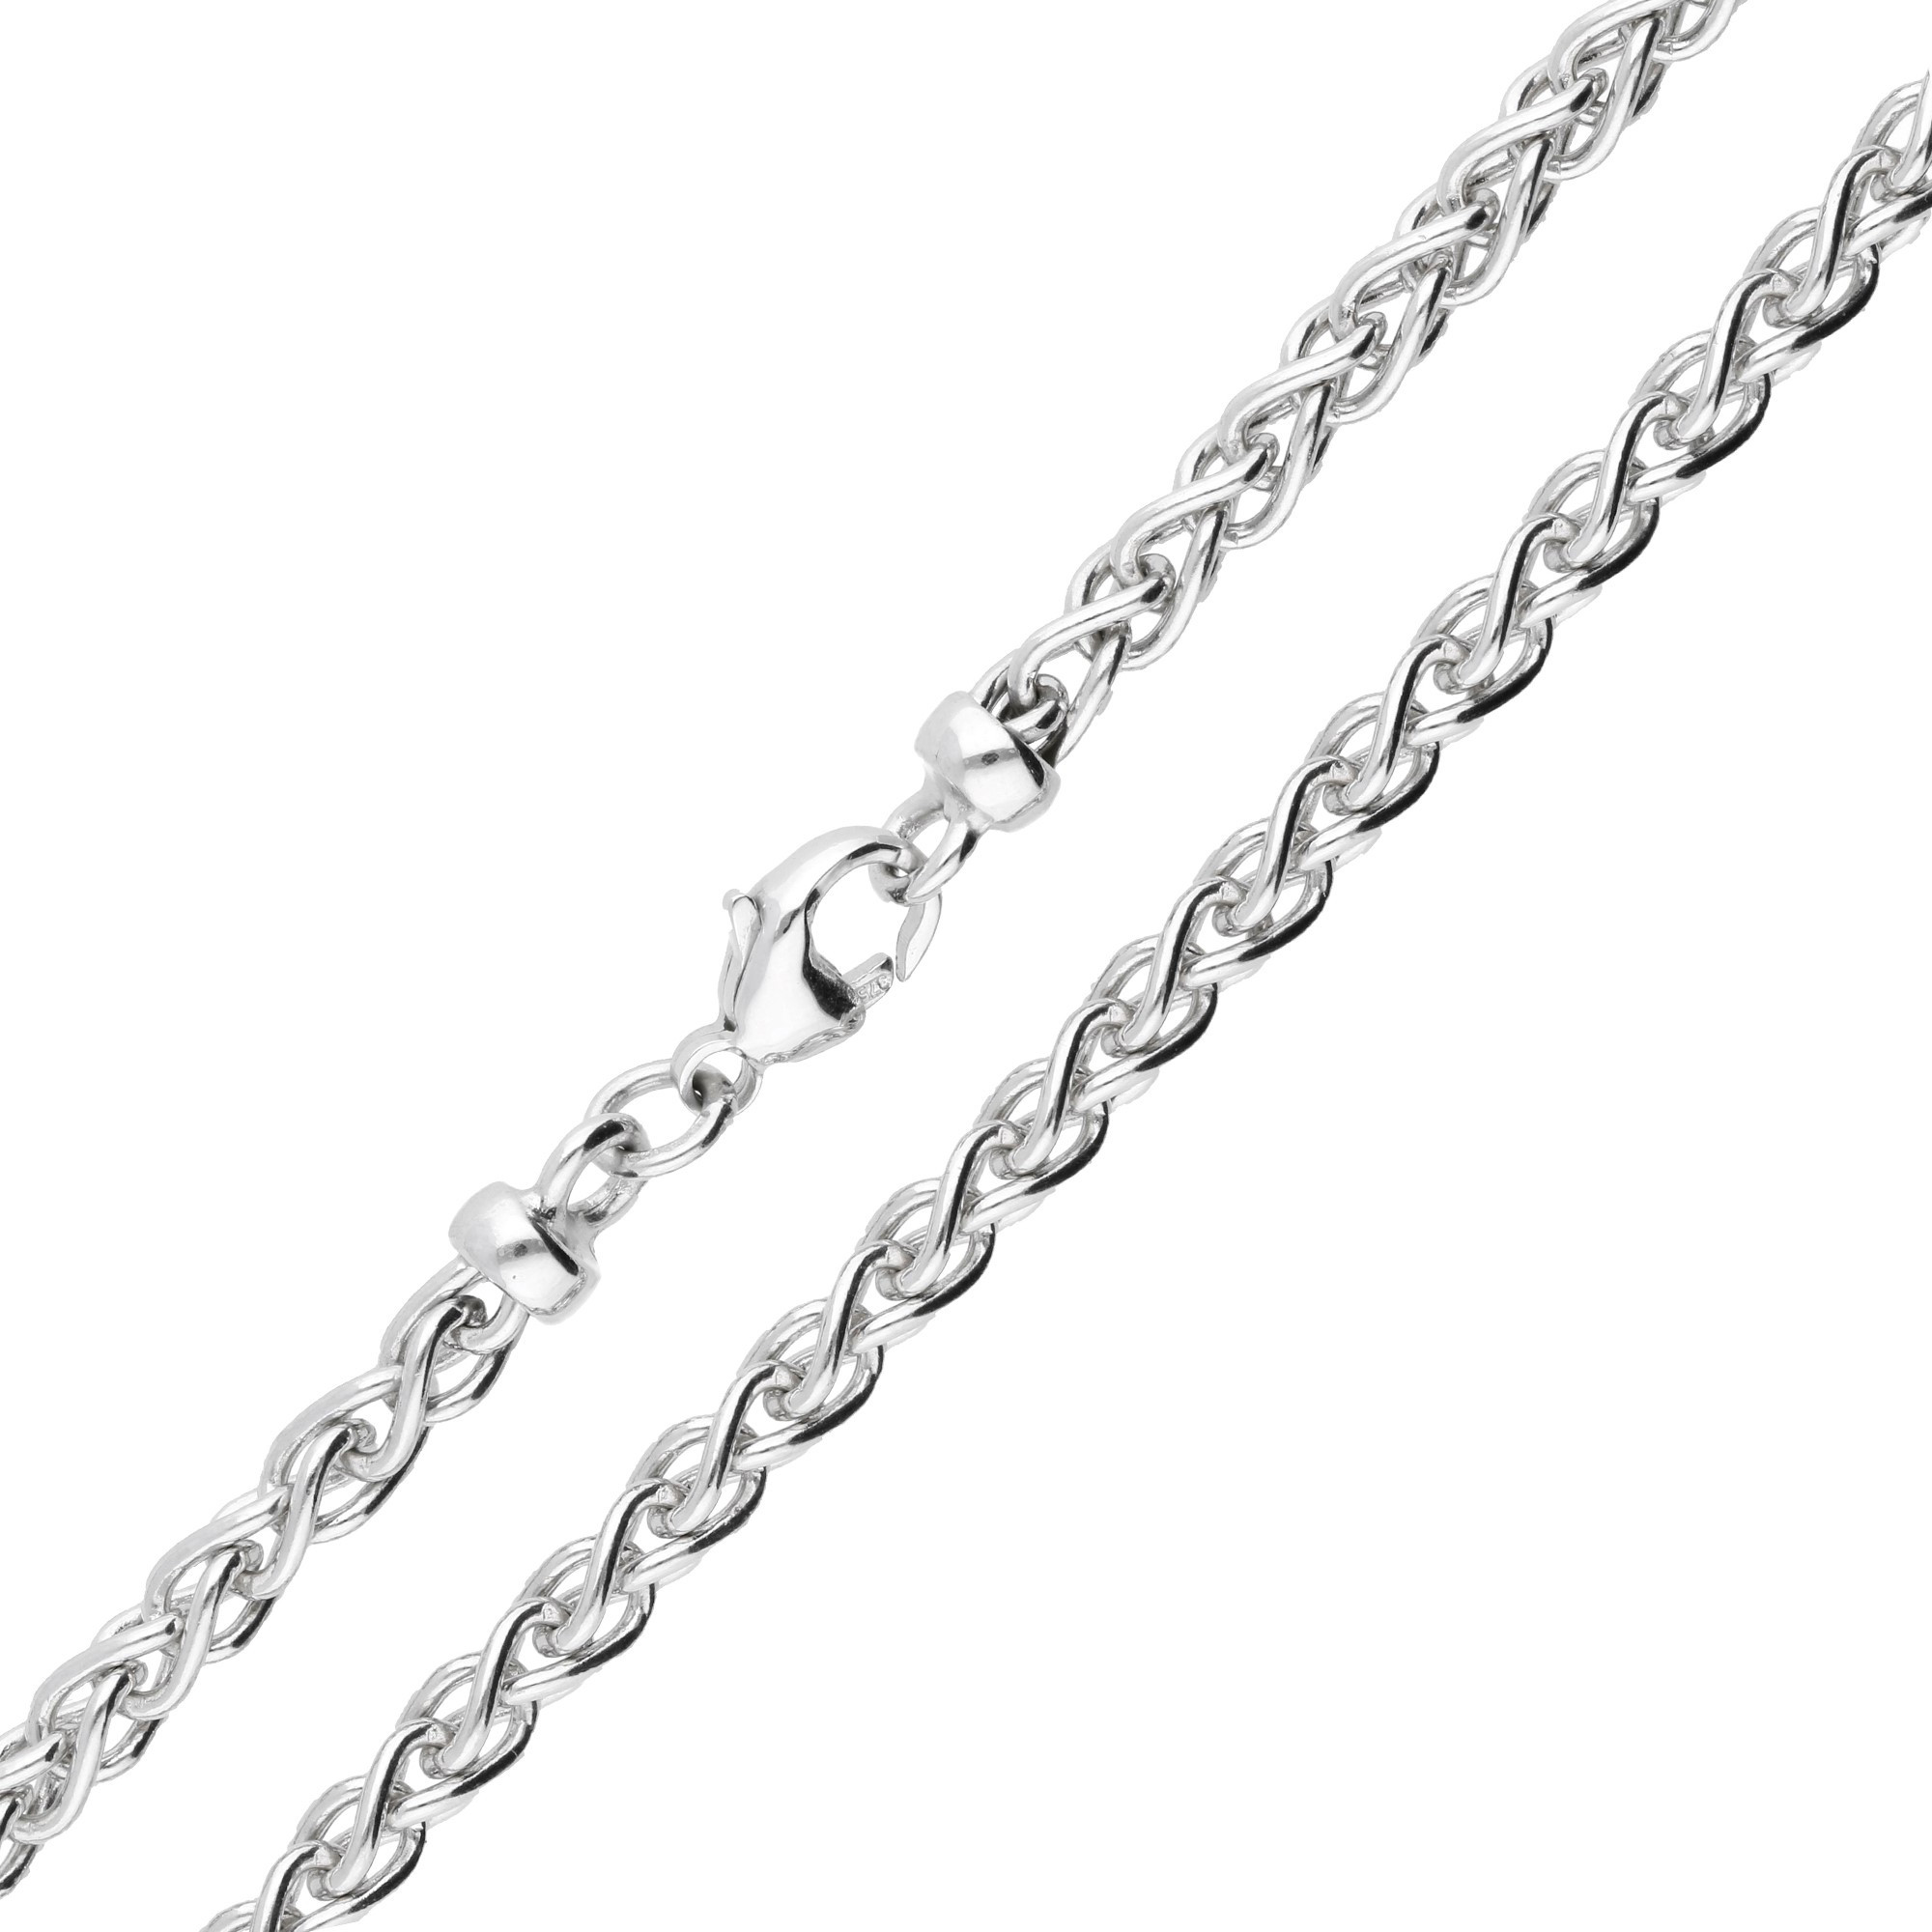 9ct White Gold 4.20mm Spiga Chain | Buy Online | Free Insured UK Delivery